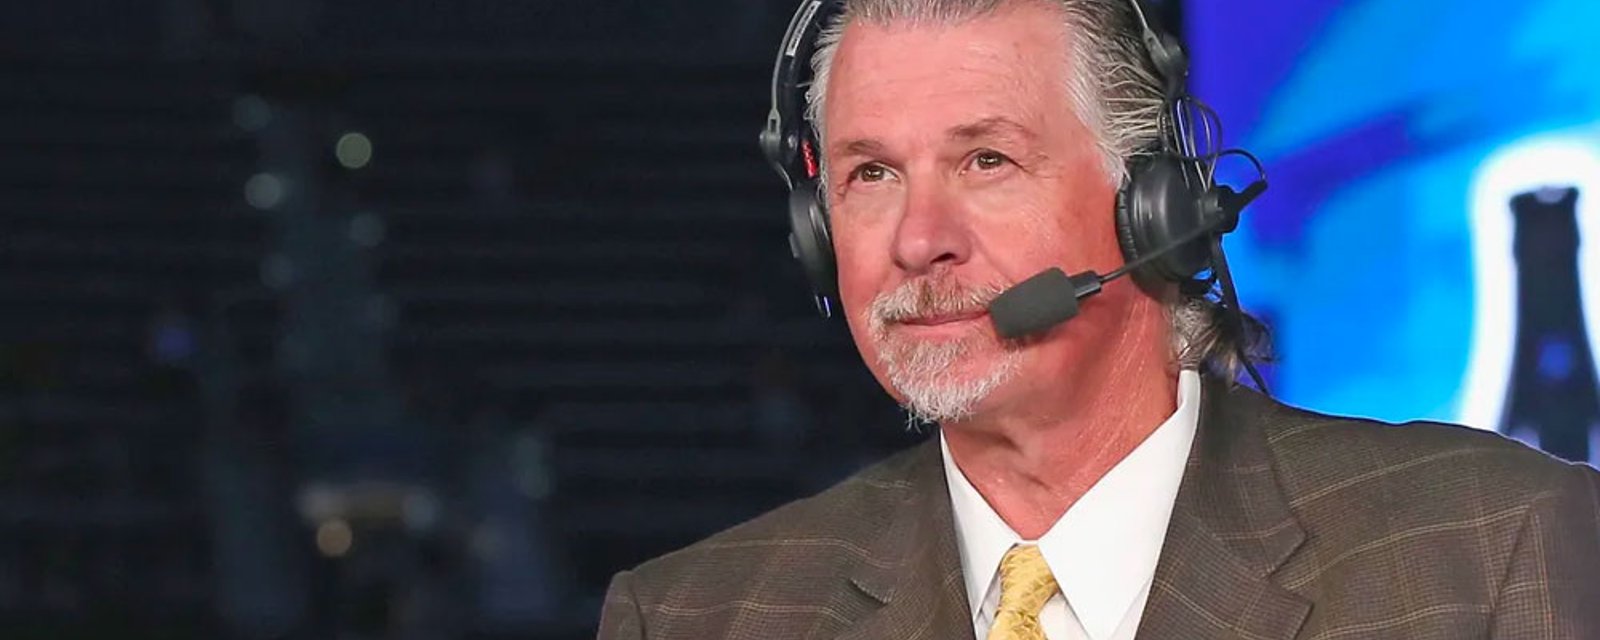 ESPN with a heartbreaking announcement concerning Barry Melrose